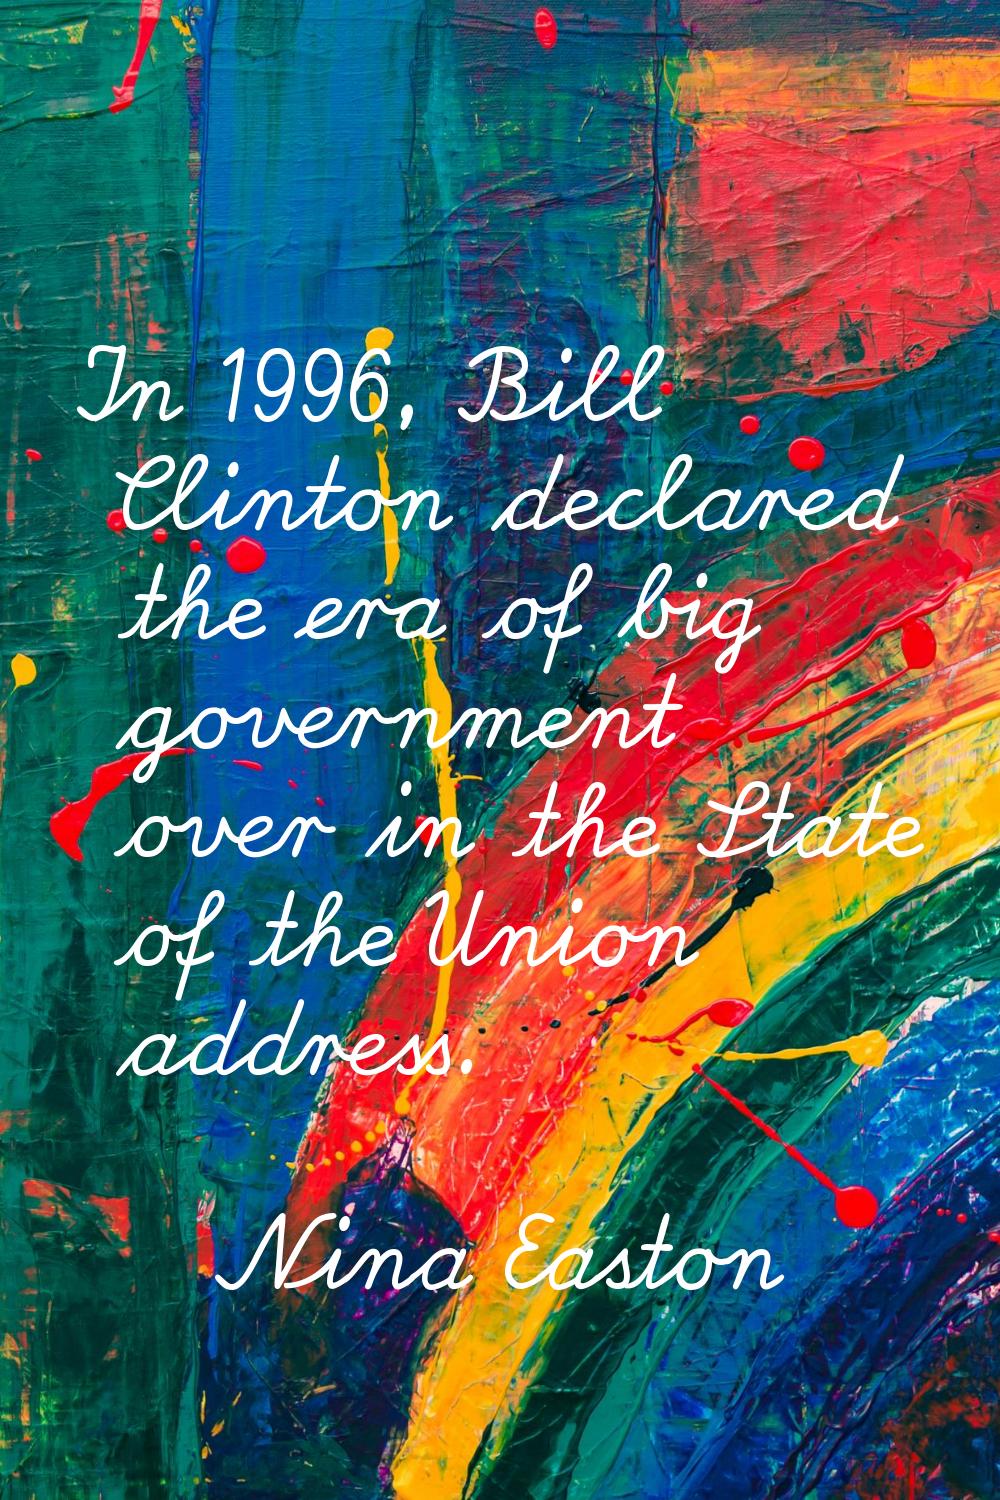 In 1996, Bill Clinton declared the era of big government over in the State of the Union address.